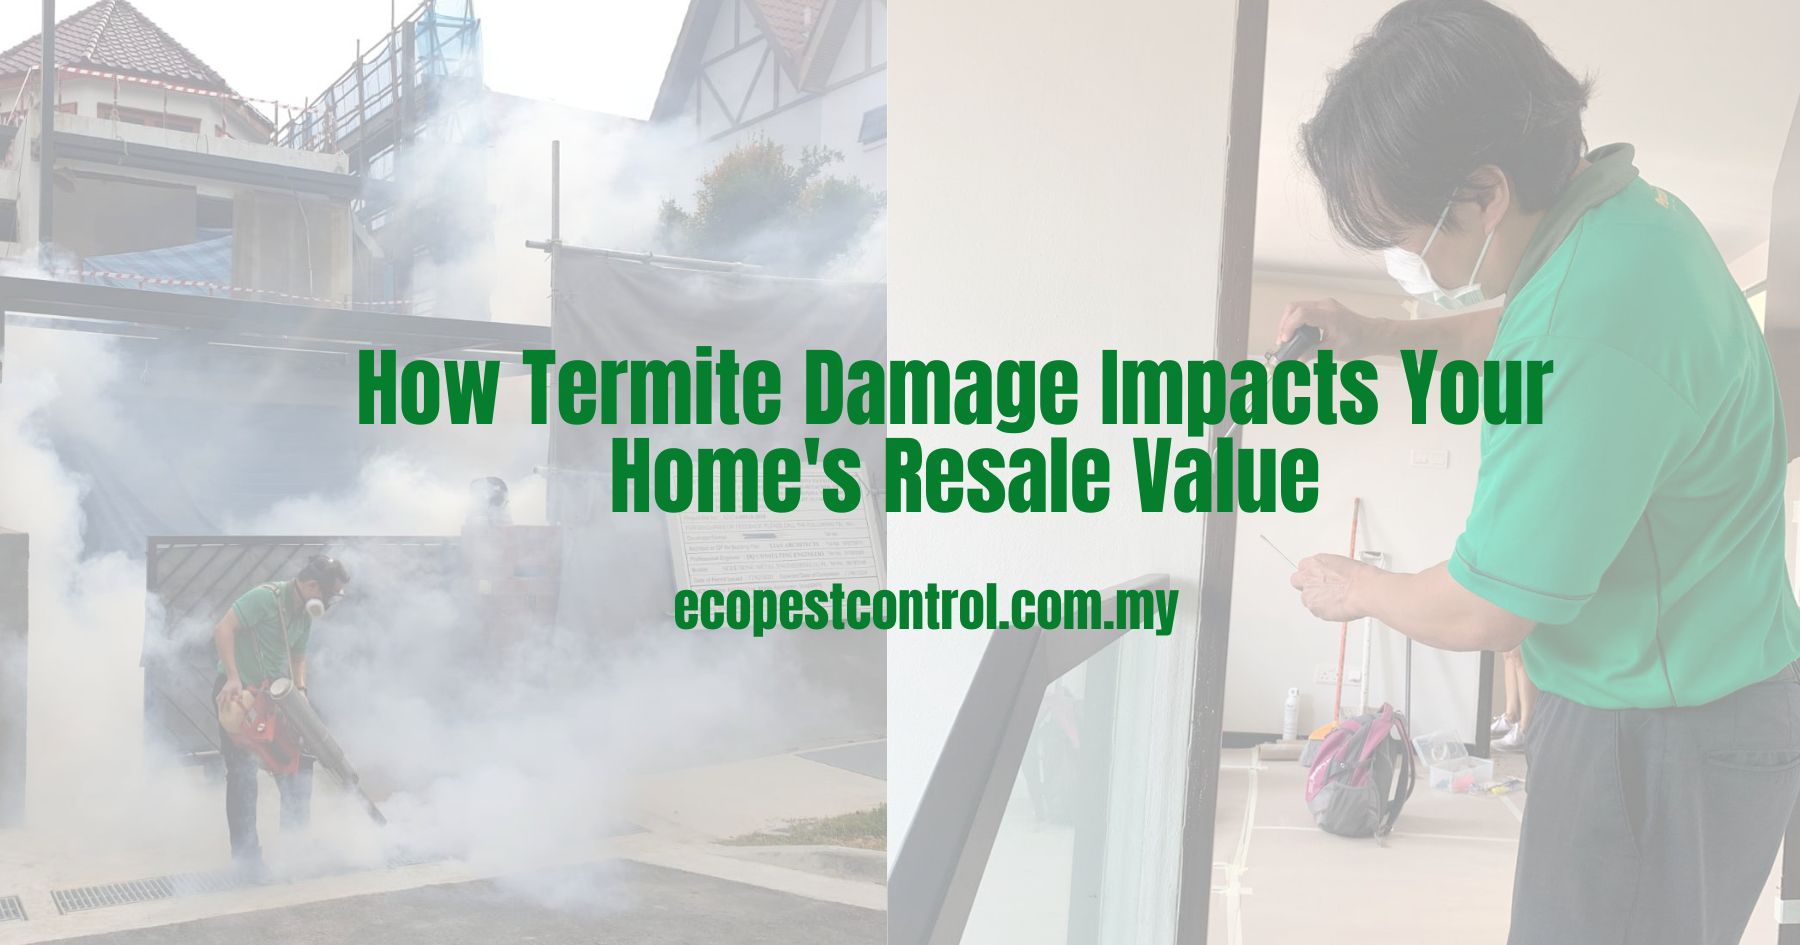 How Termite Damage Impacts Your Home's Resale Value